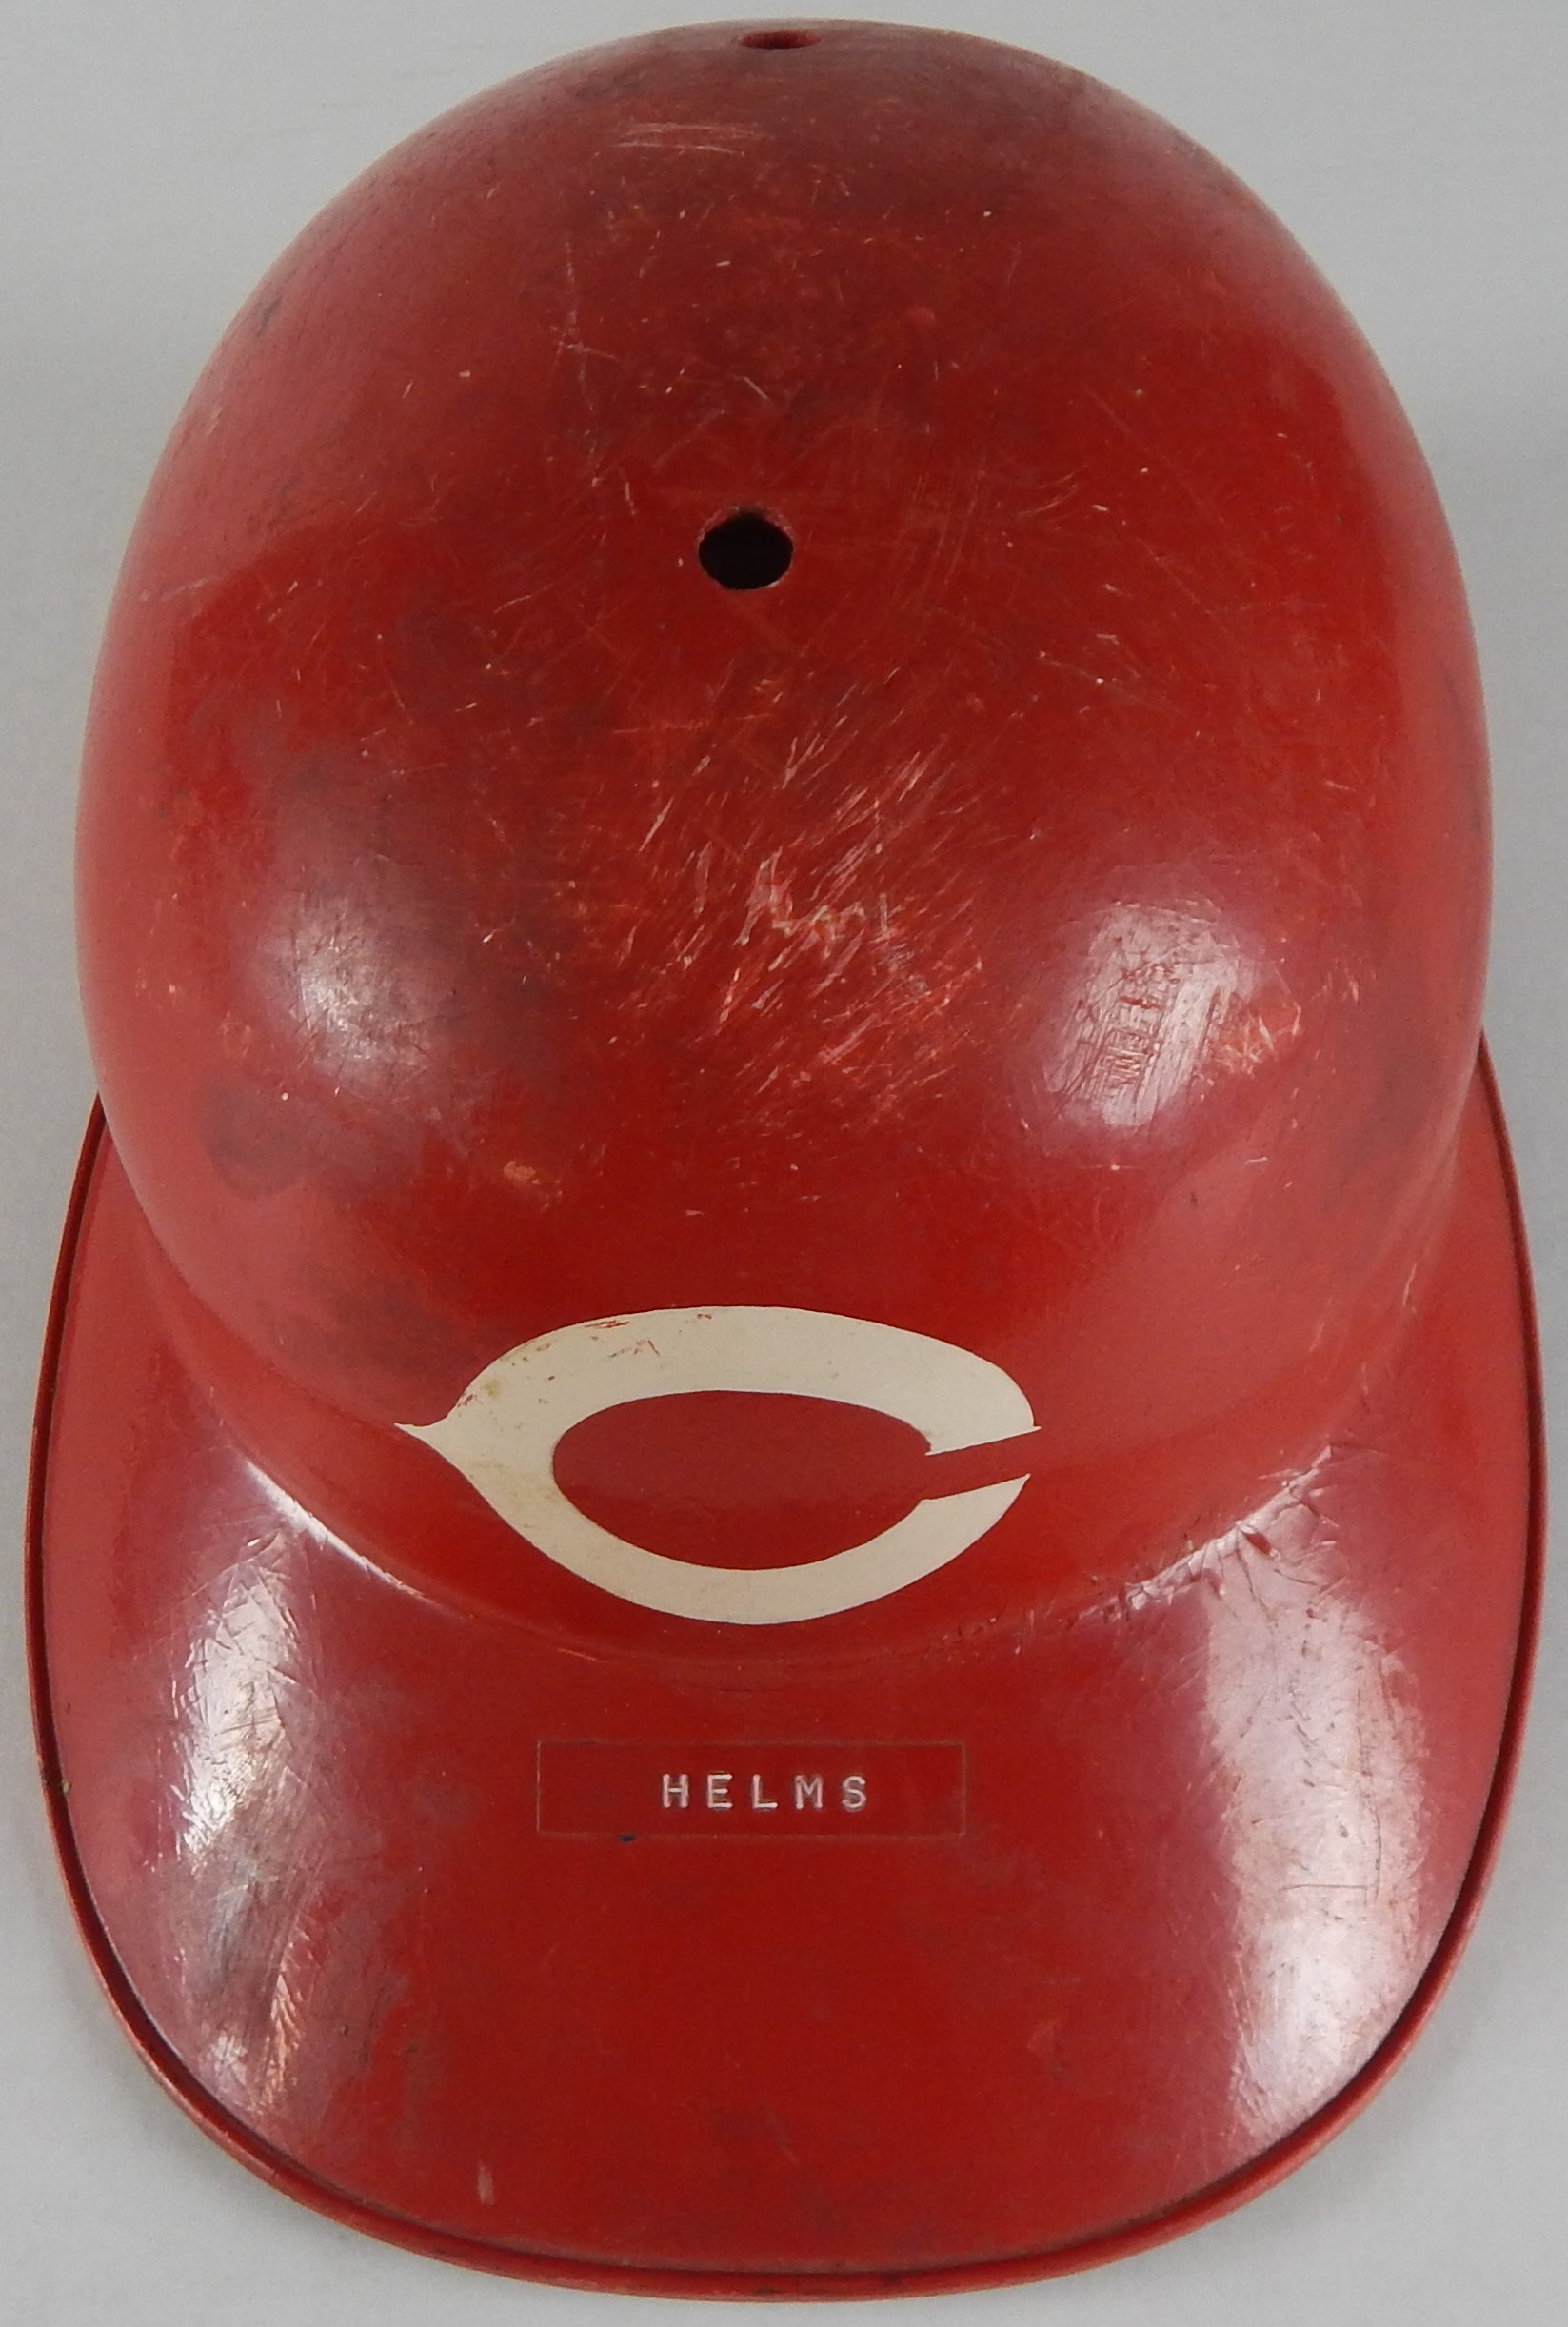 Late 1960s Game Used Tommy Helms Batting Helmet From the Bernie Stowe Collection